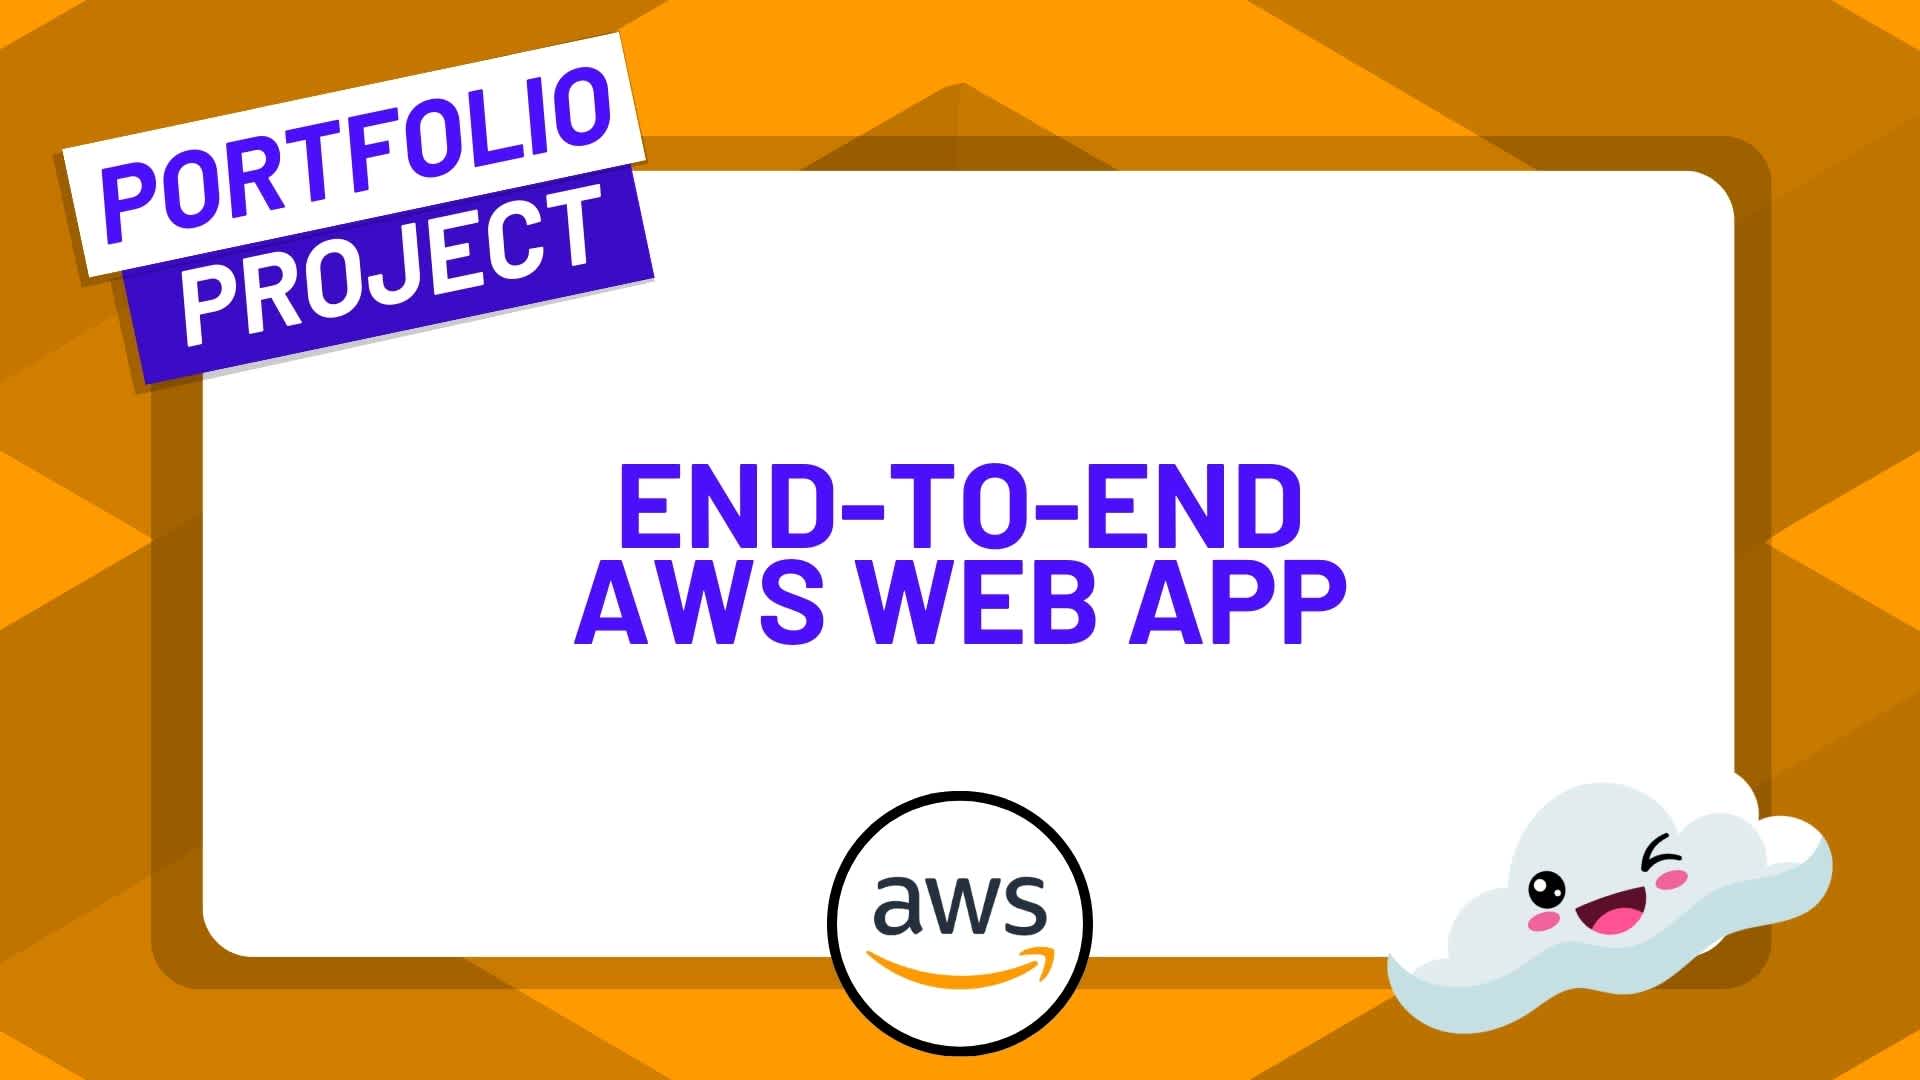 Build an End-to-End Web App from Scratch with AWS